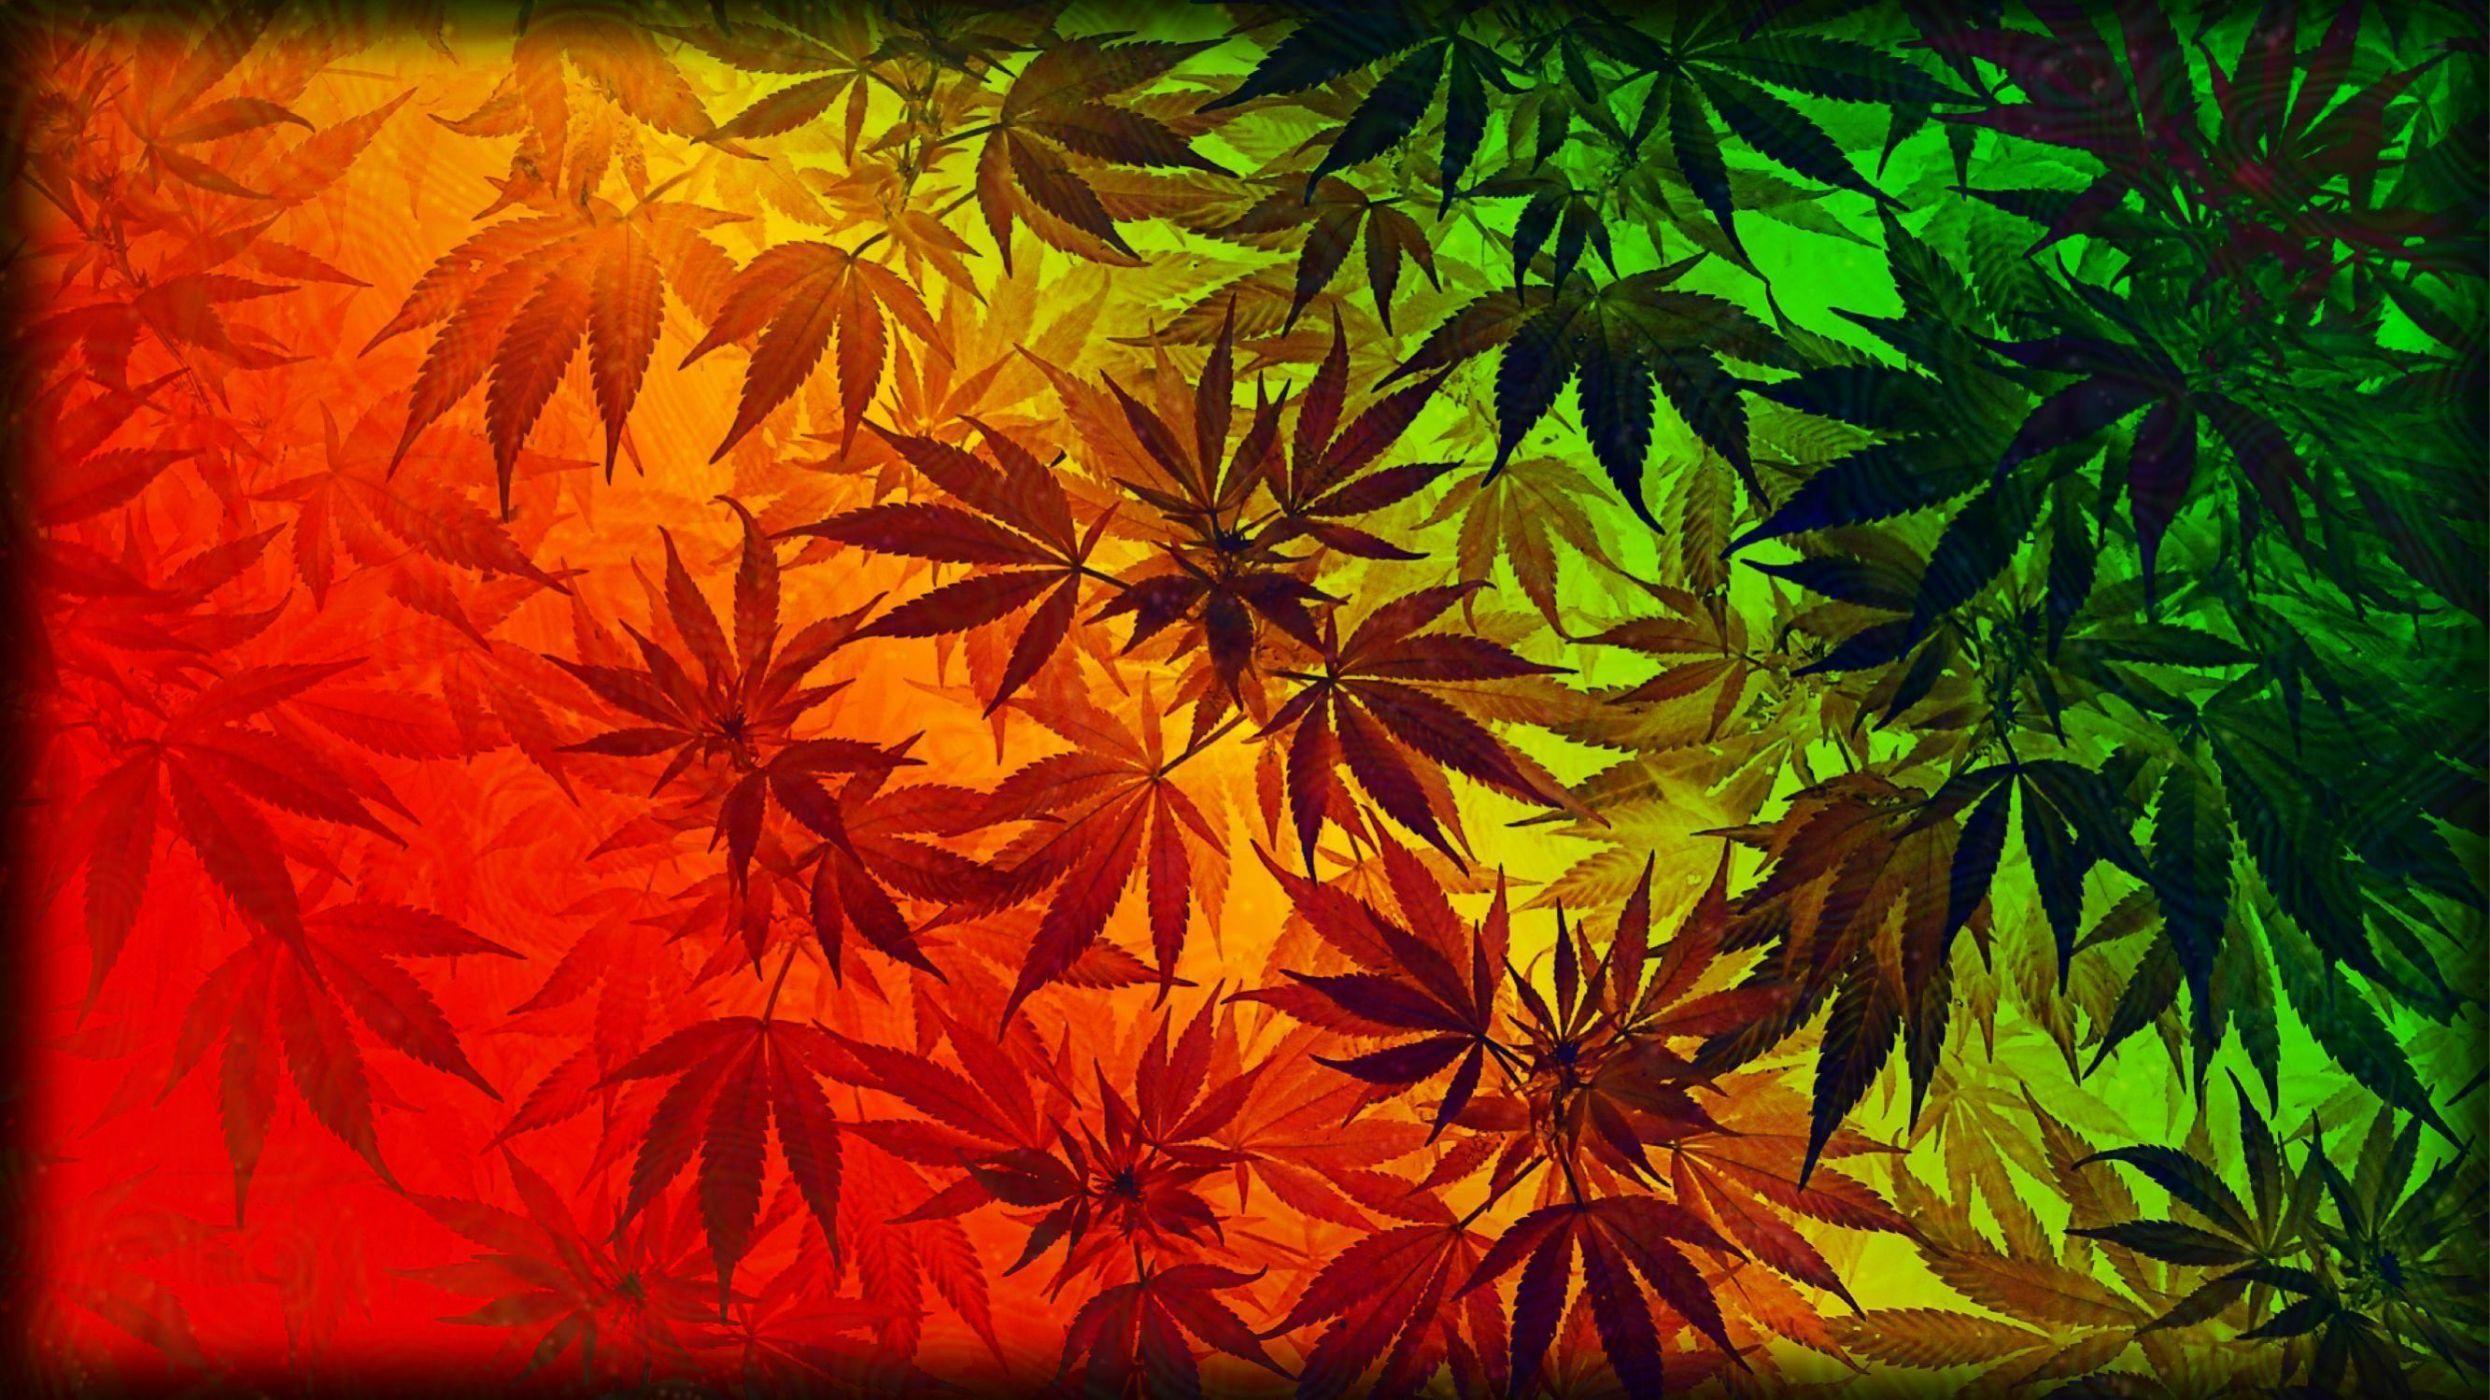 Weed Background